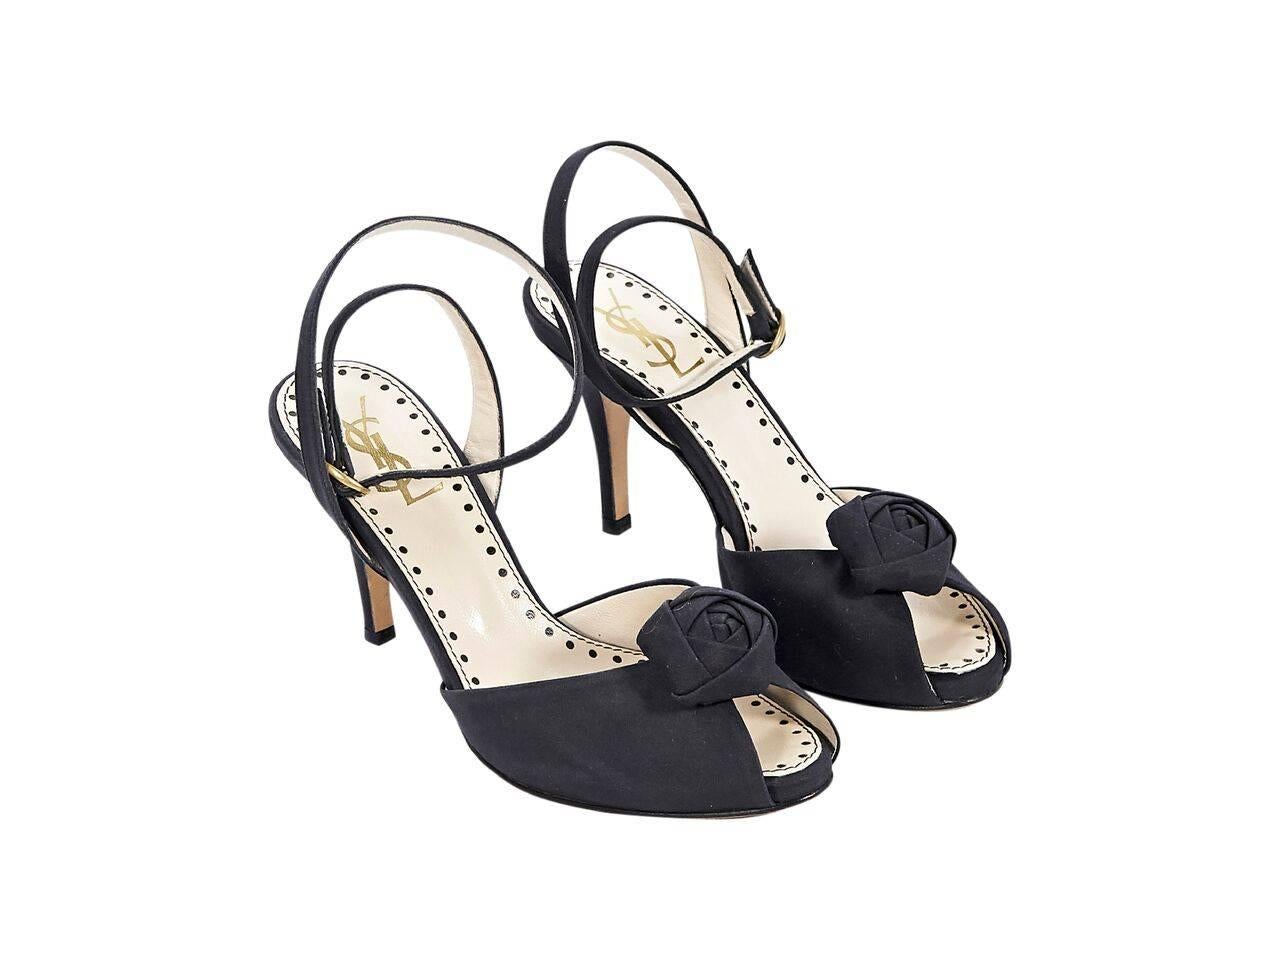 Product details:  Black satin pumps by Yves Saint Laurent.  Adjustable ankle strap.  Rosette accents vamp.  Peep toe.  
Condition: Pre-owned. Very good.
Est. Retail $ 648.00